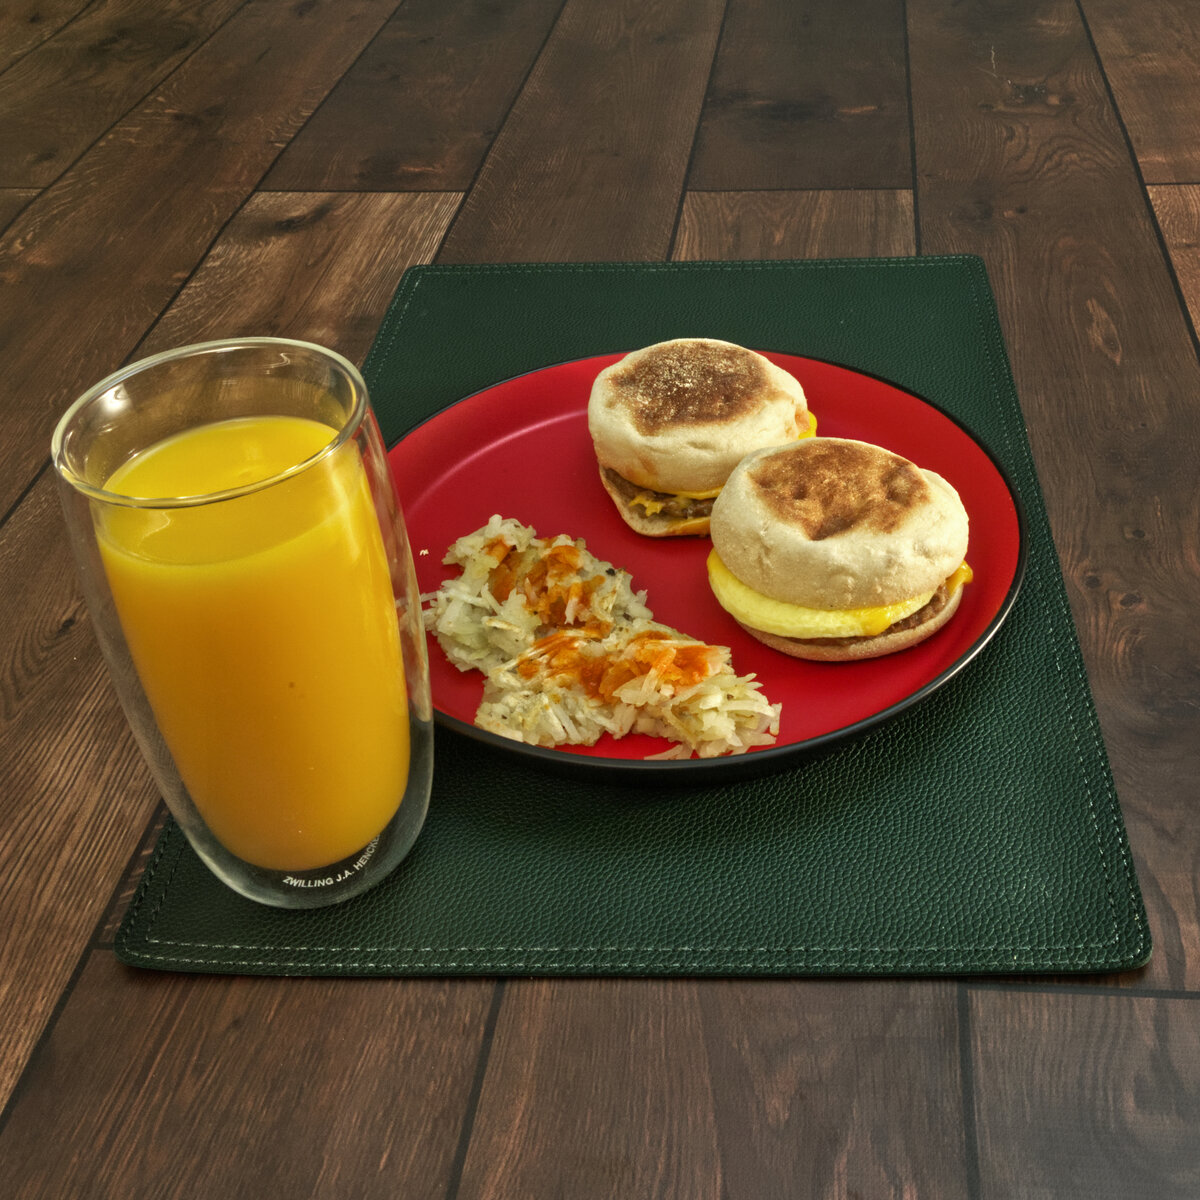 Sausage, Egg and Cheese Muffins with Hash Browns and Orange Juice